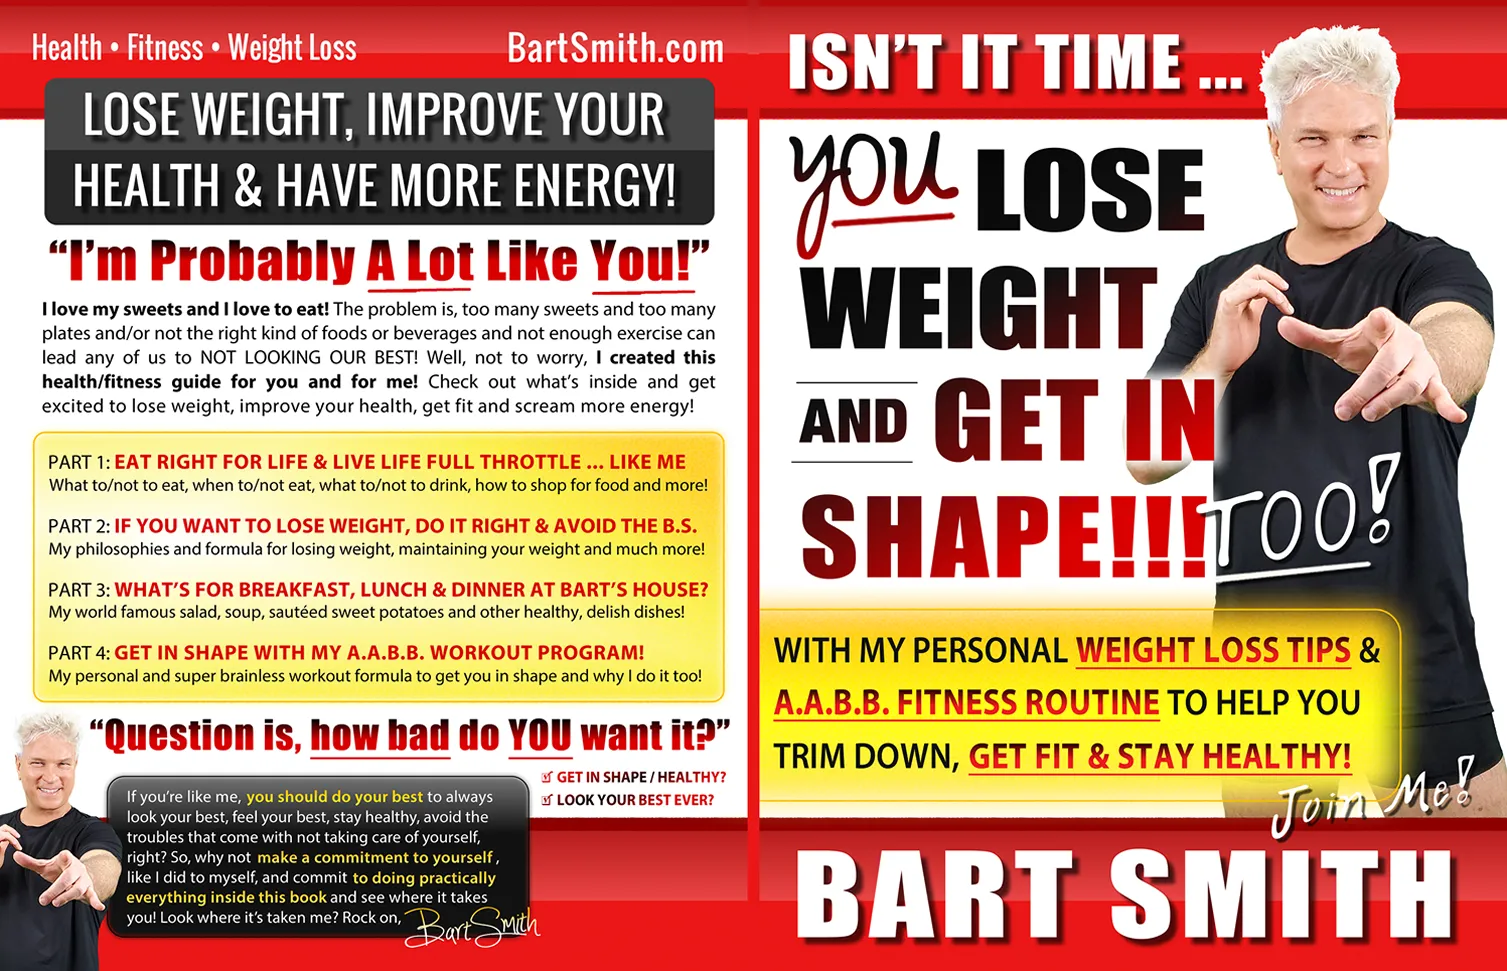 Bart Smith's Weight Loss & Fitness Book